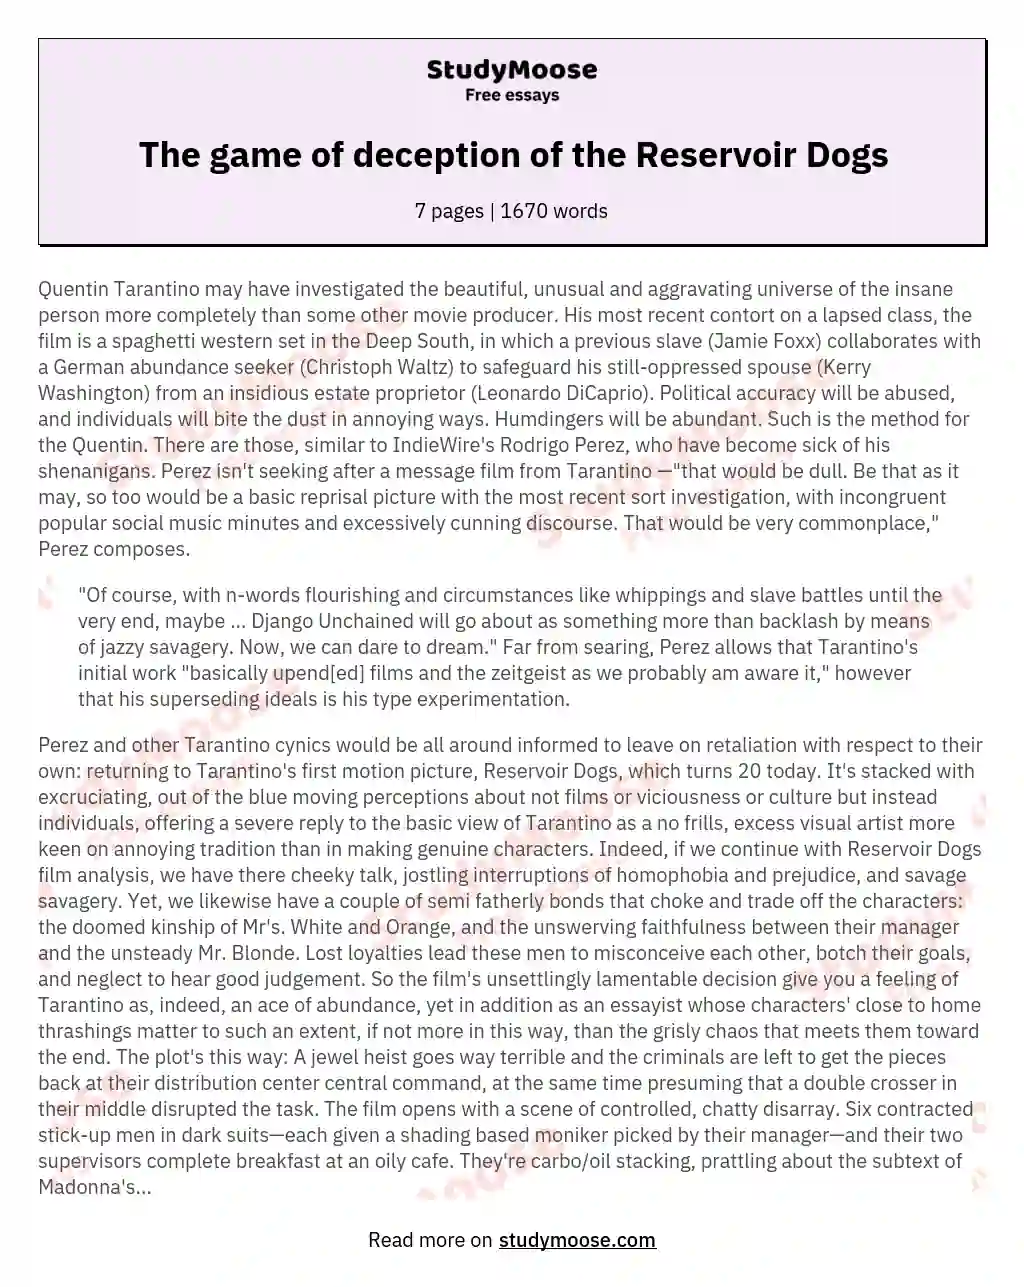 The game of deception of the Reservoir Dogs essay